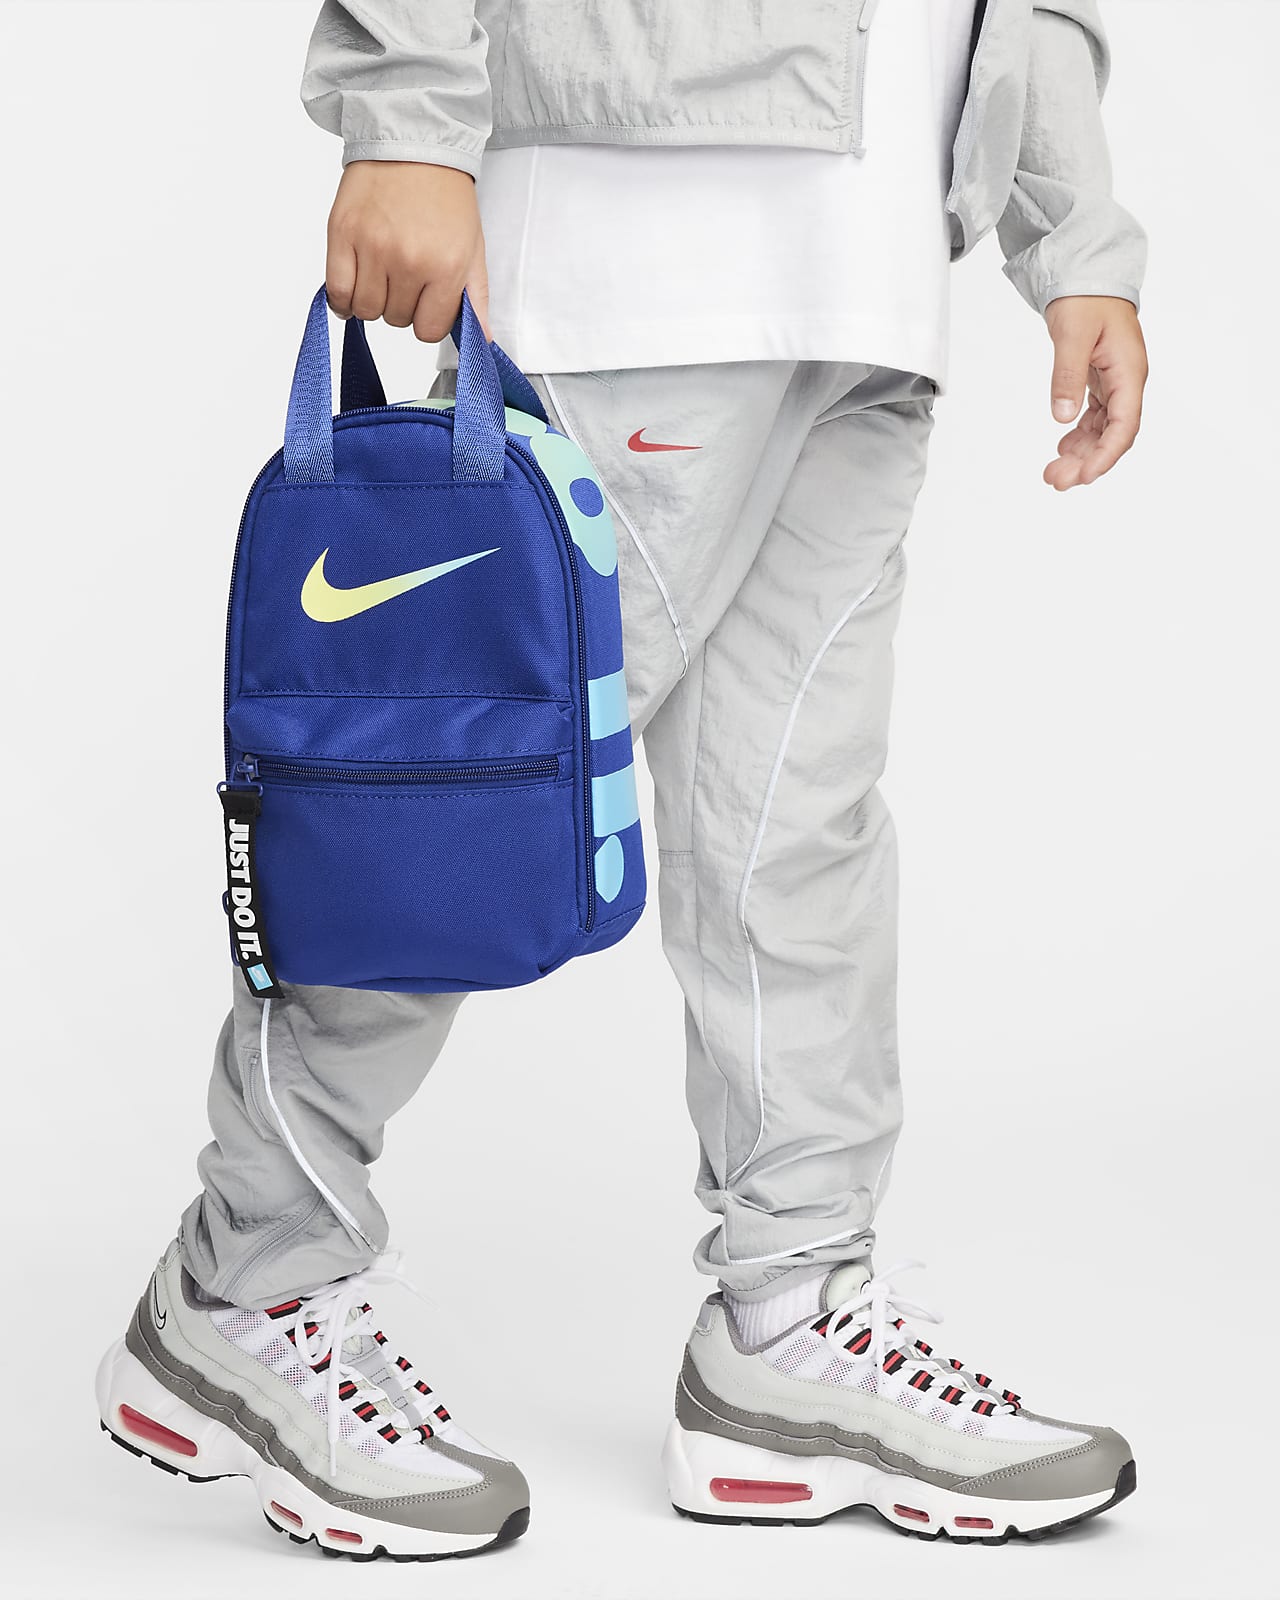 Nike / Fuel Pack Lunch Bag